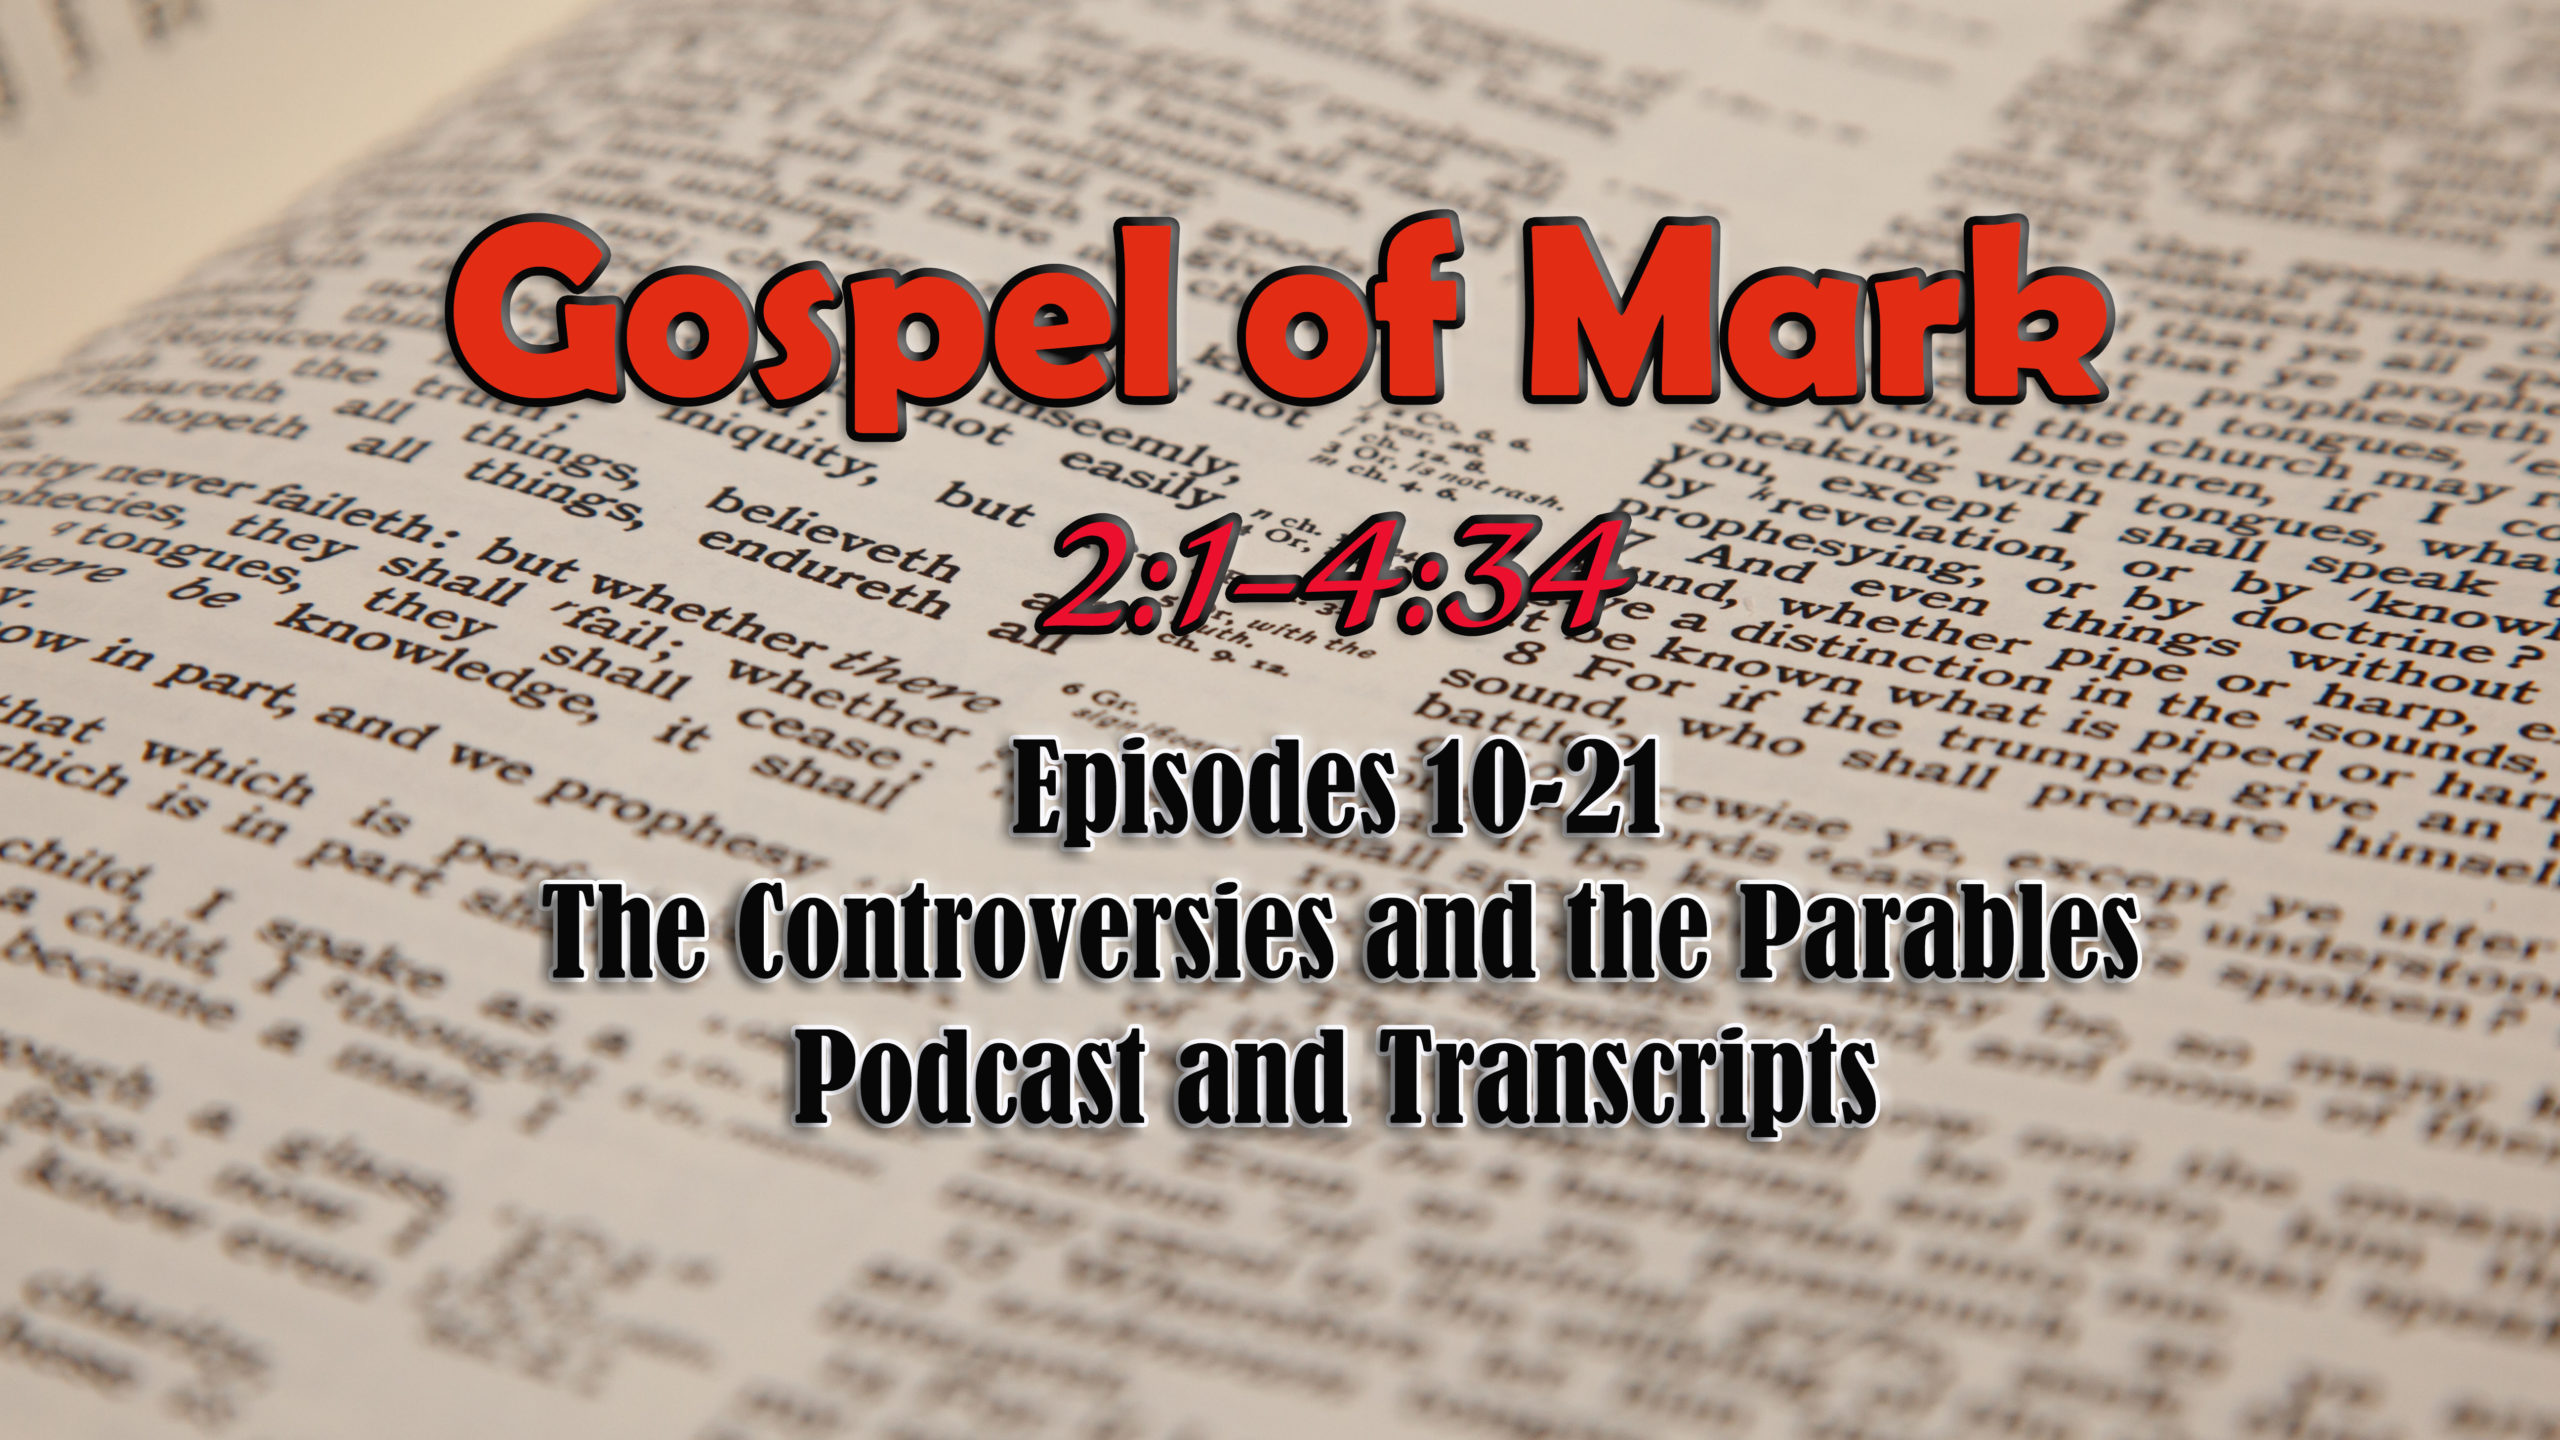 Episodes 10-21: Gospel of Mark Podcasts and Transcripts for the Five Controversies and Insider/Outsider Parables